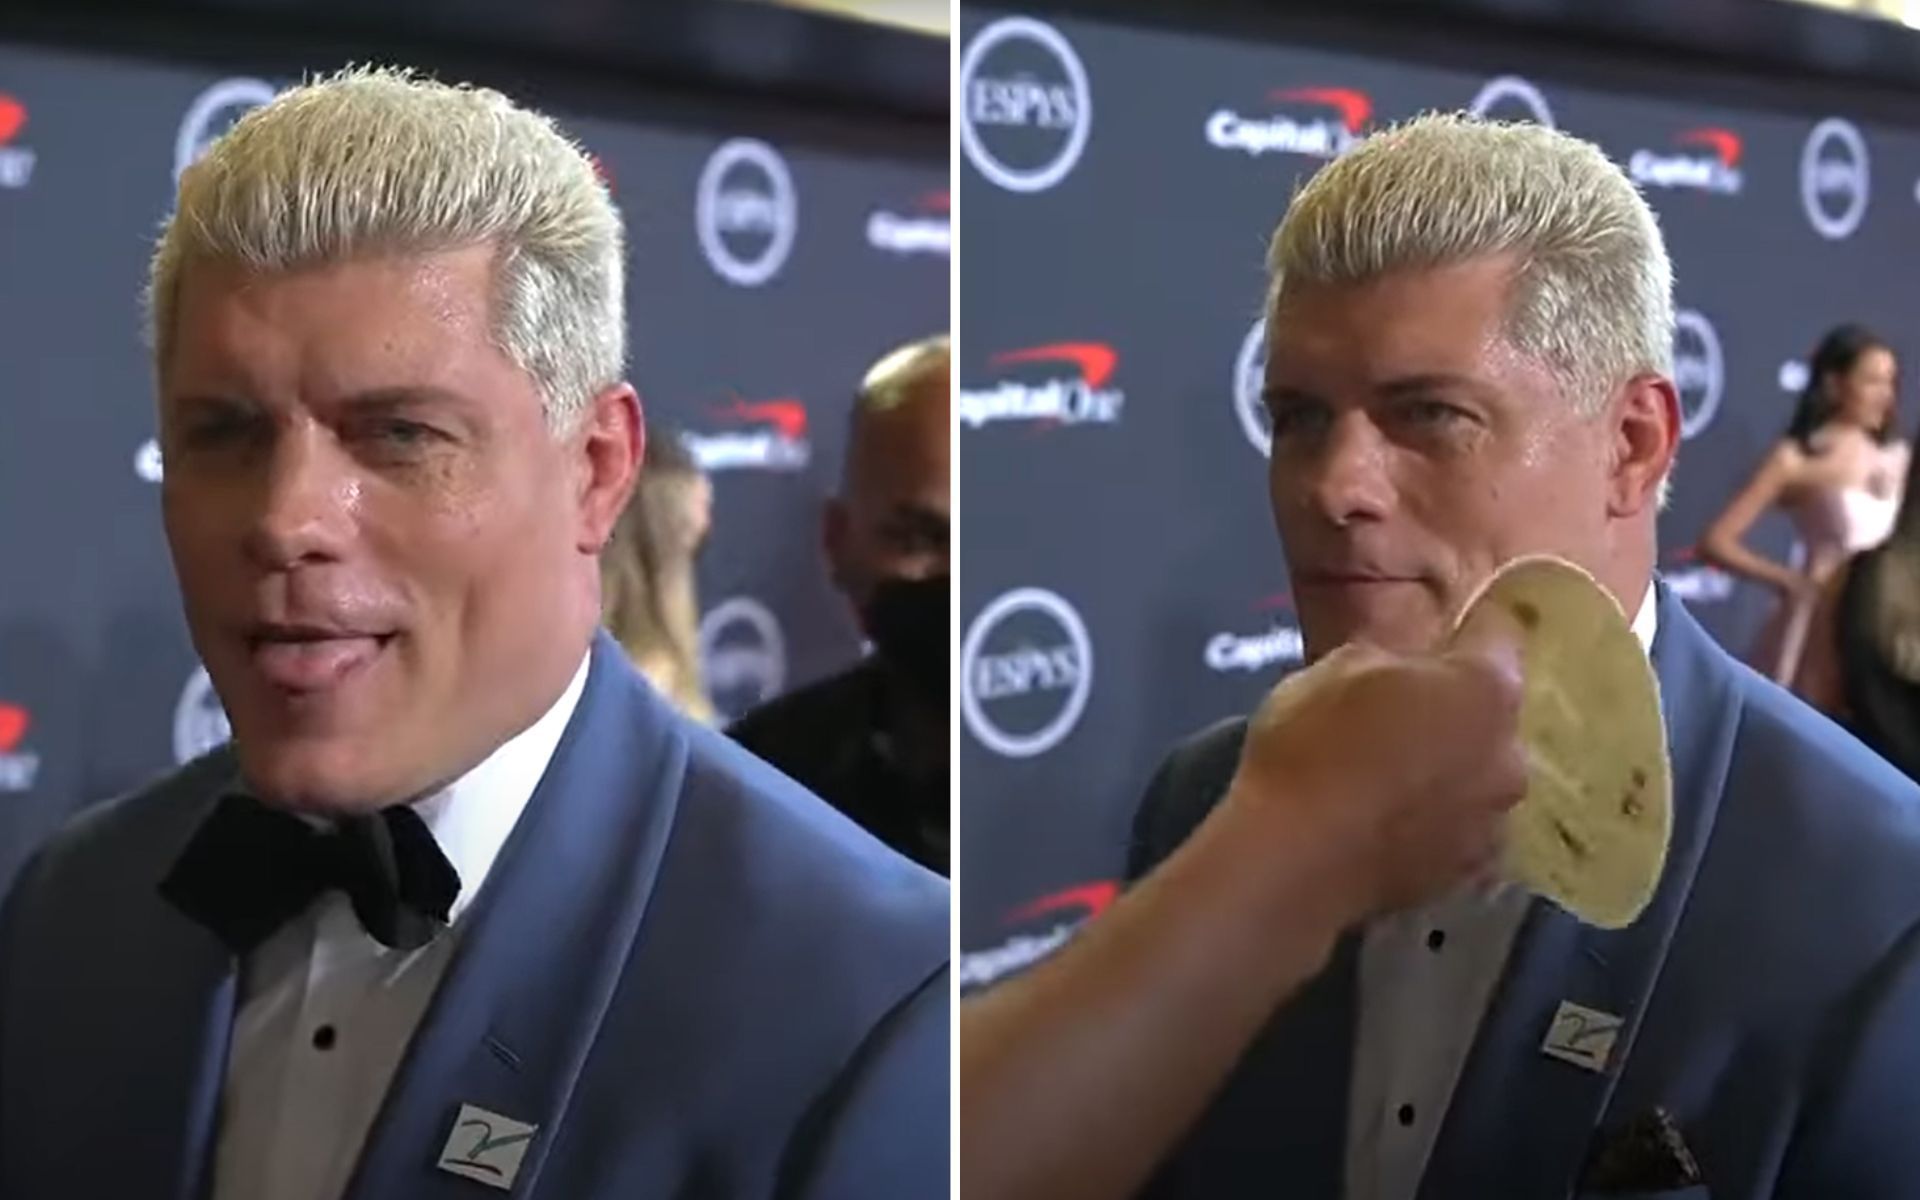 Cody Rhodes appeared at the 2022 ESPY Awards